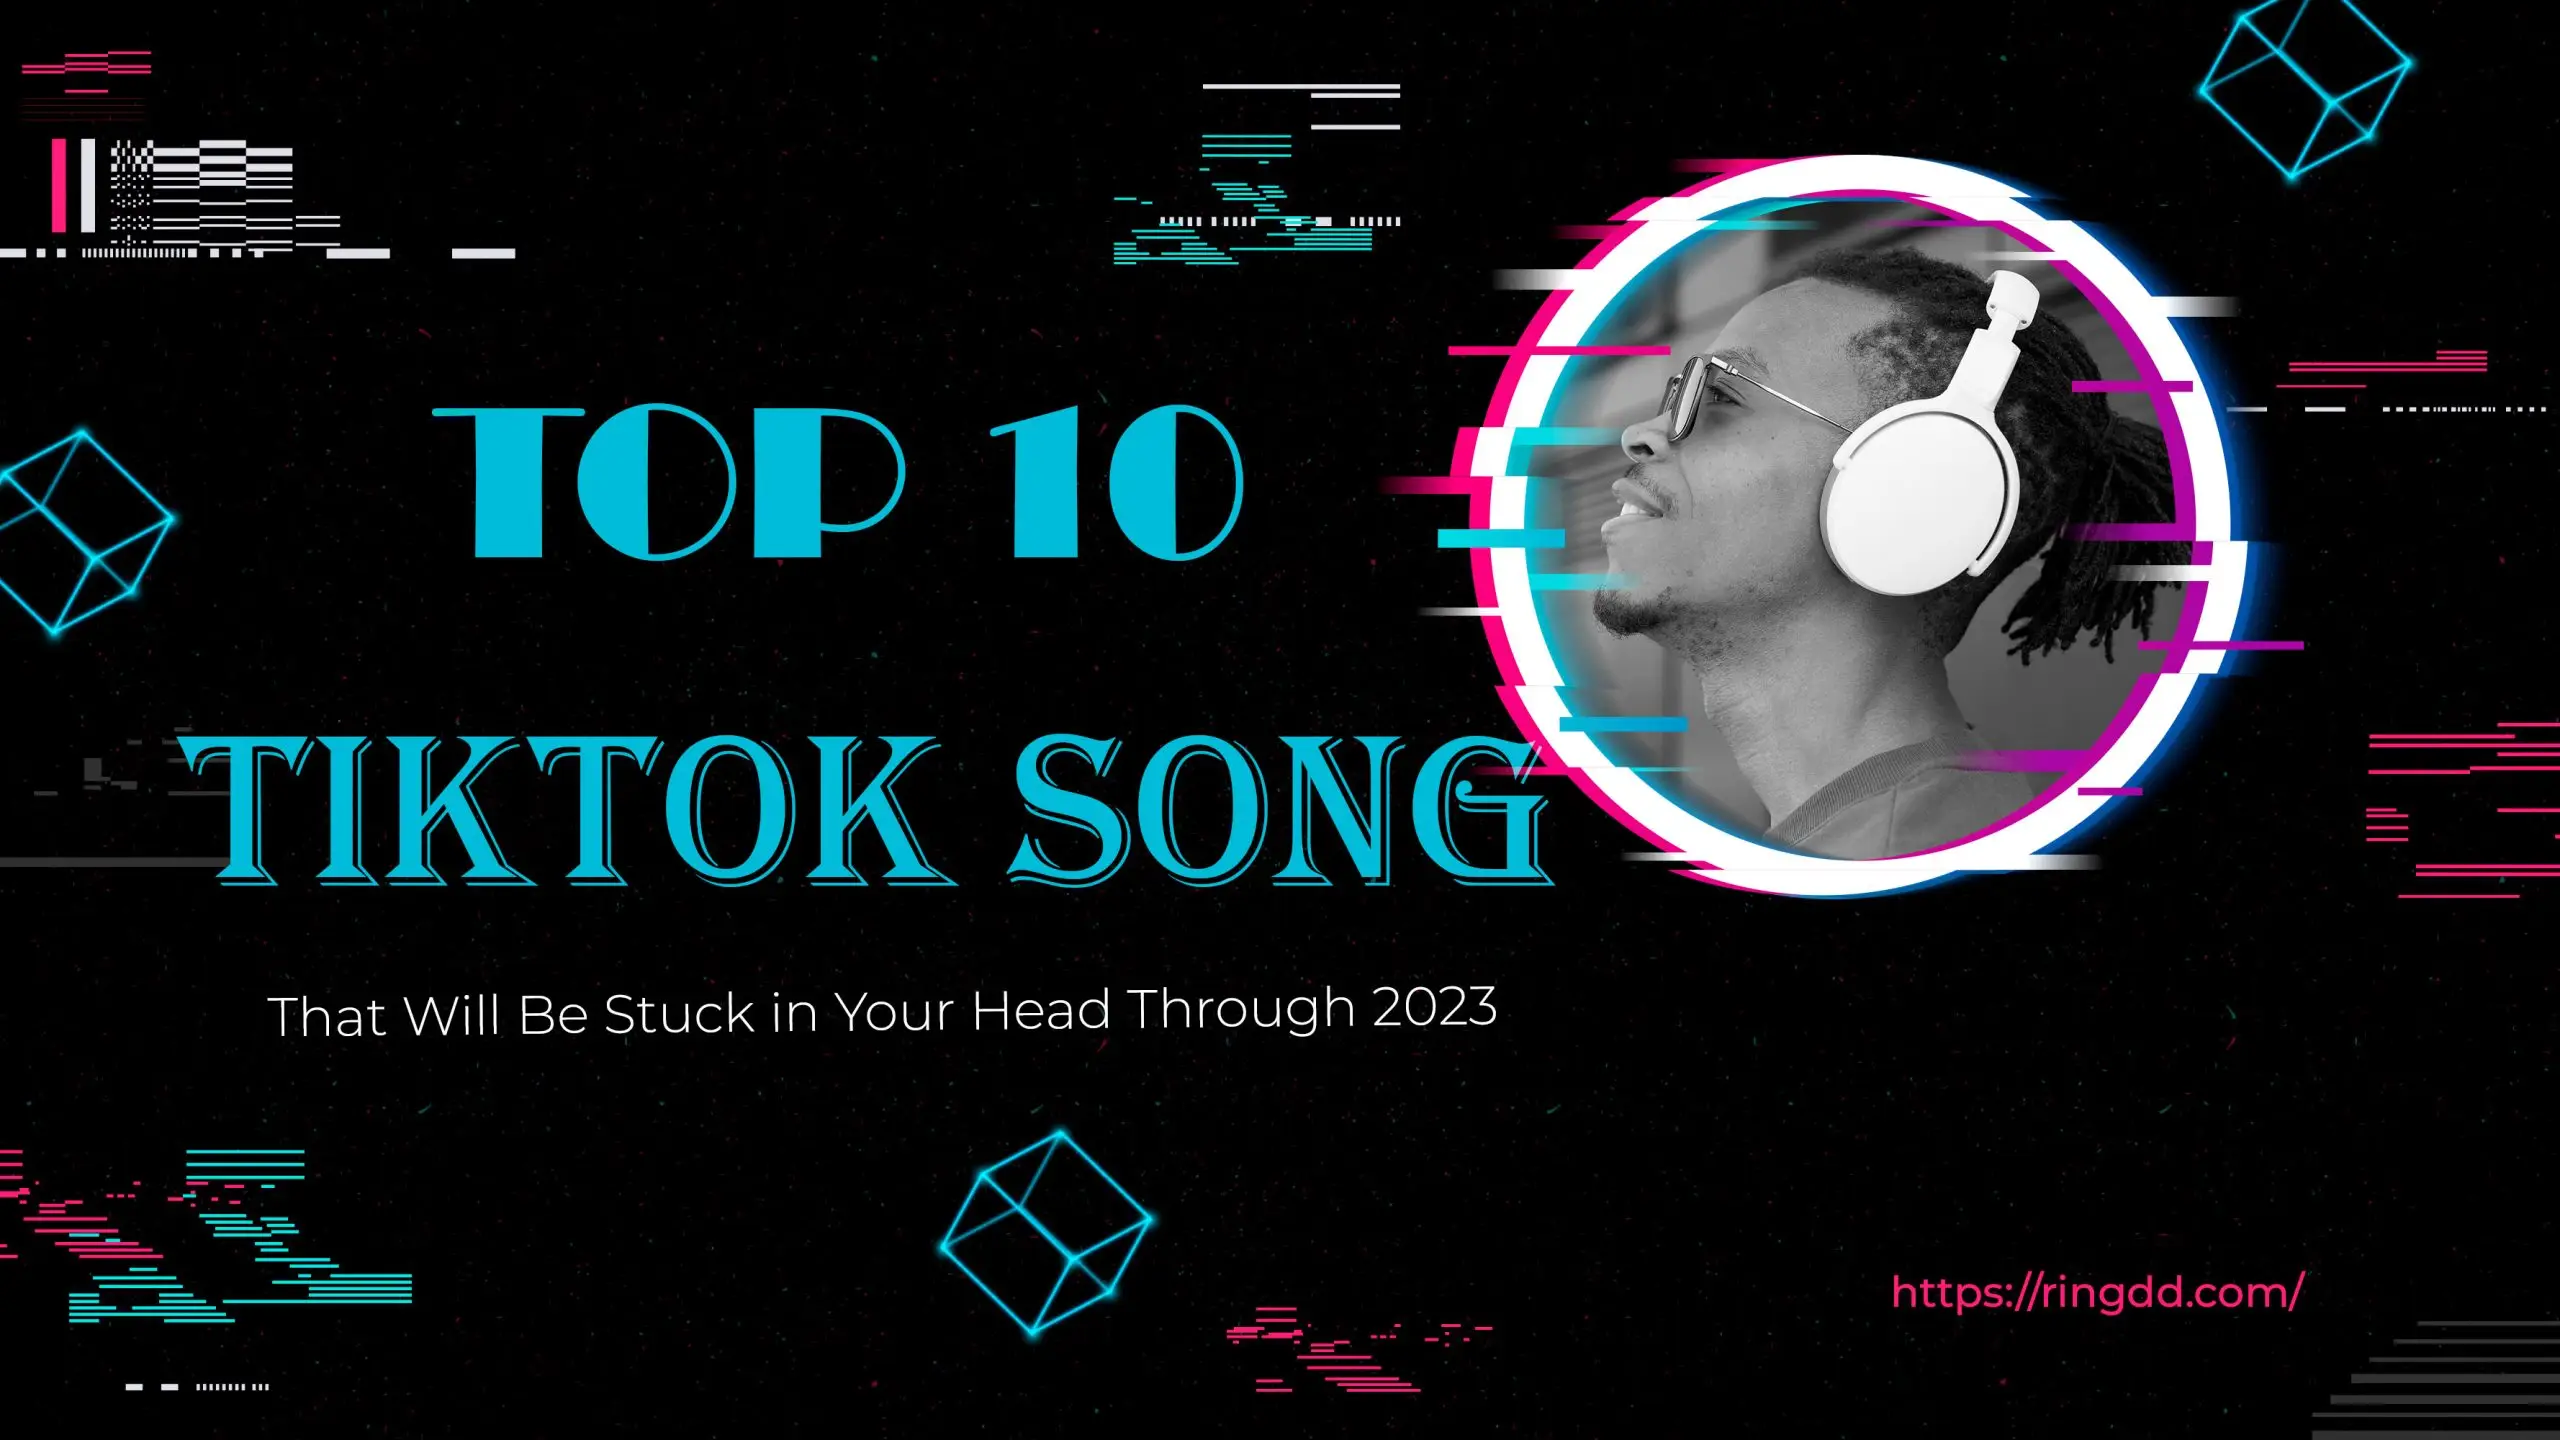 Top 10 TikTok Songs That Will Be Stuck in Your Head Through 2023